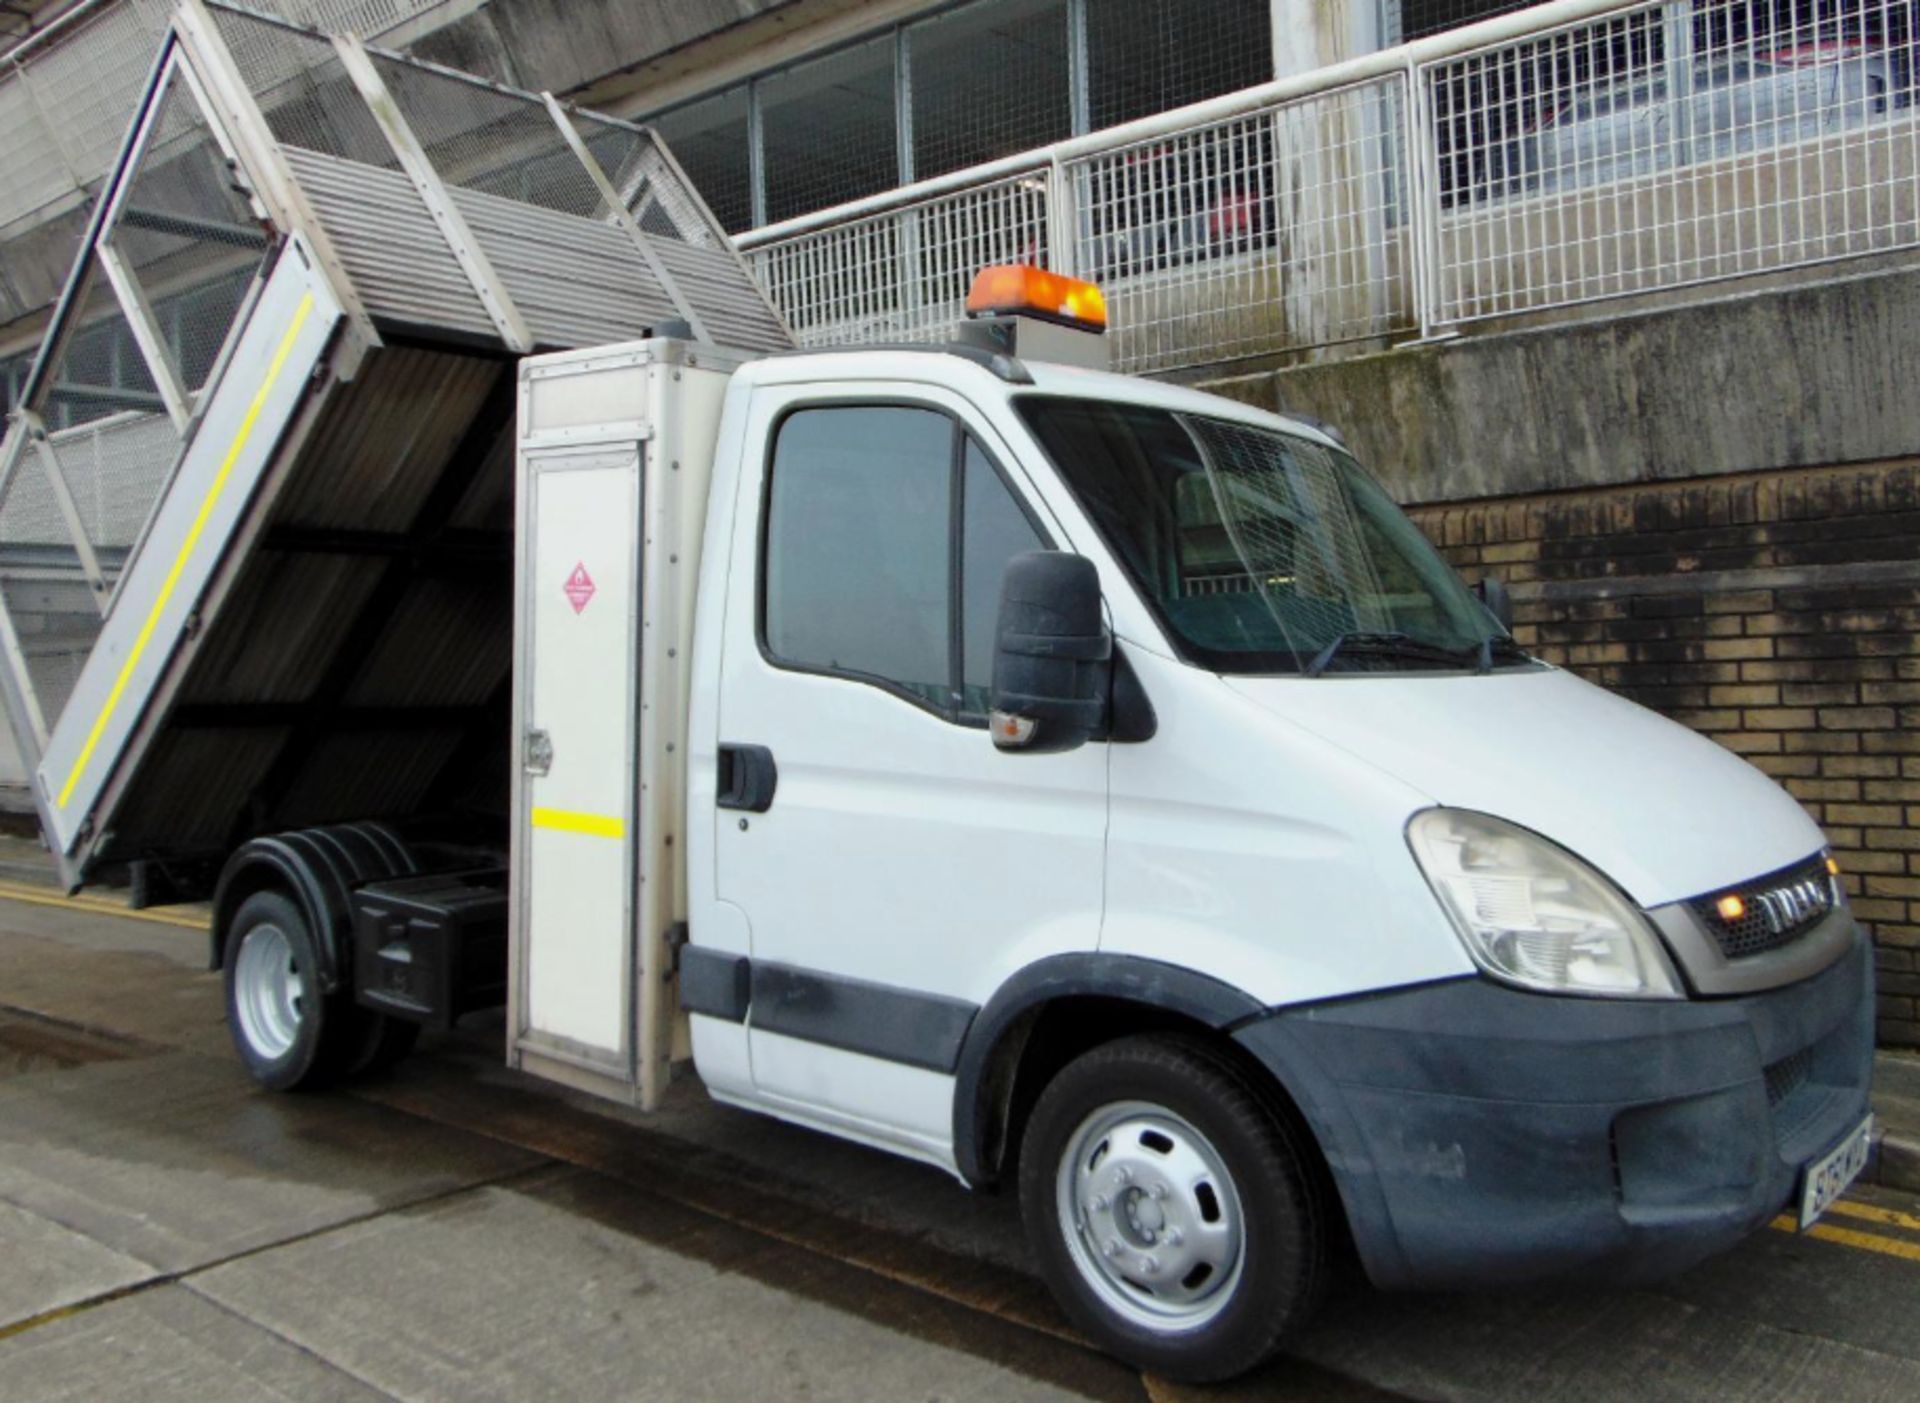 2011 IVECO DAILY TIPPER - DIRECT FROM CONWY COUNCIL, LOW MILEAGE, IMPECCABLE CONDITION